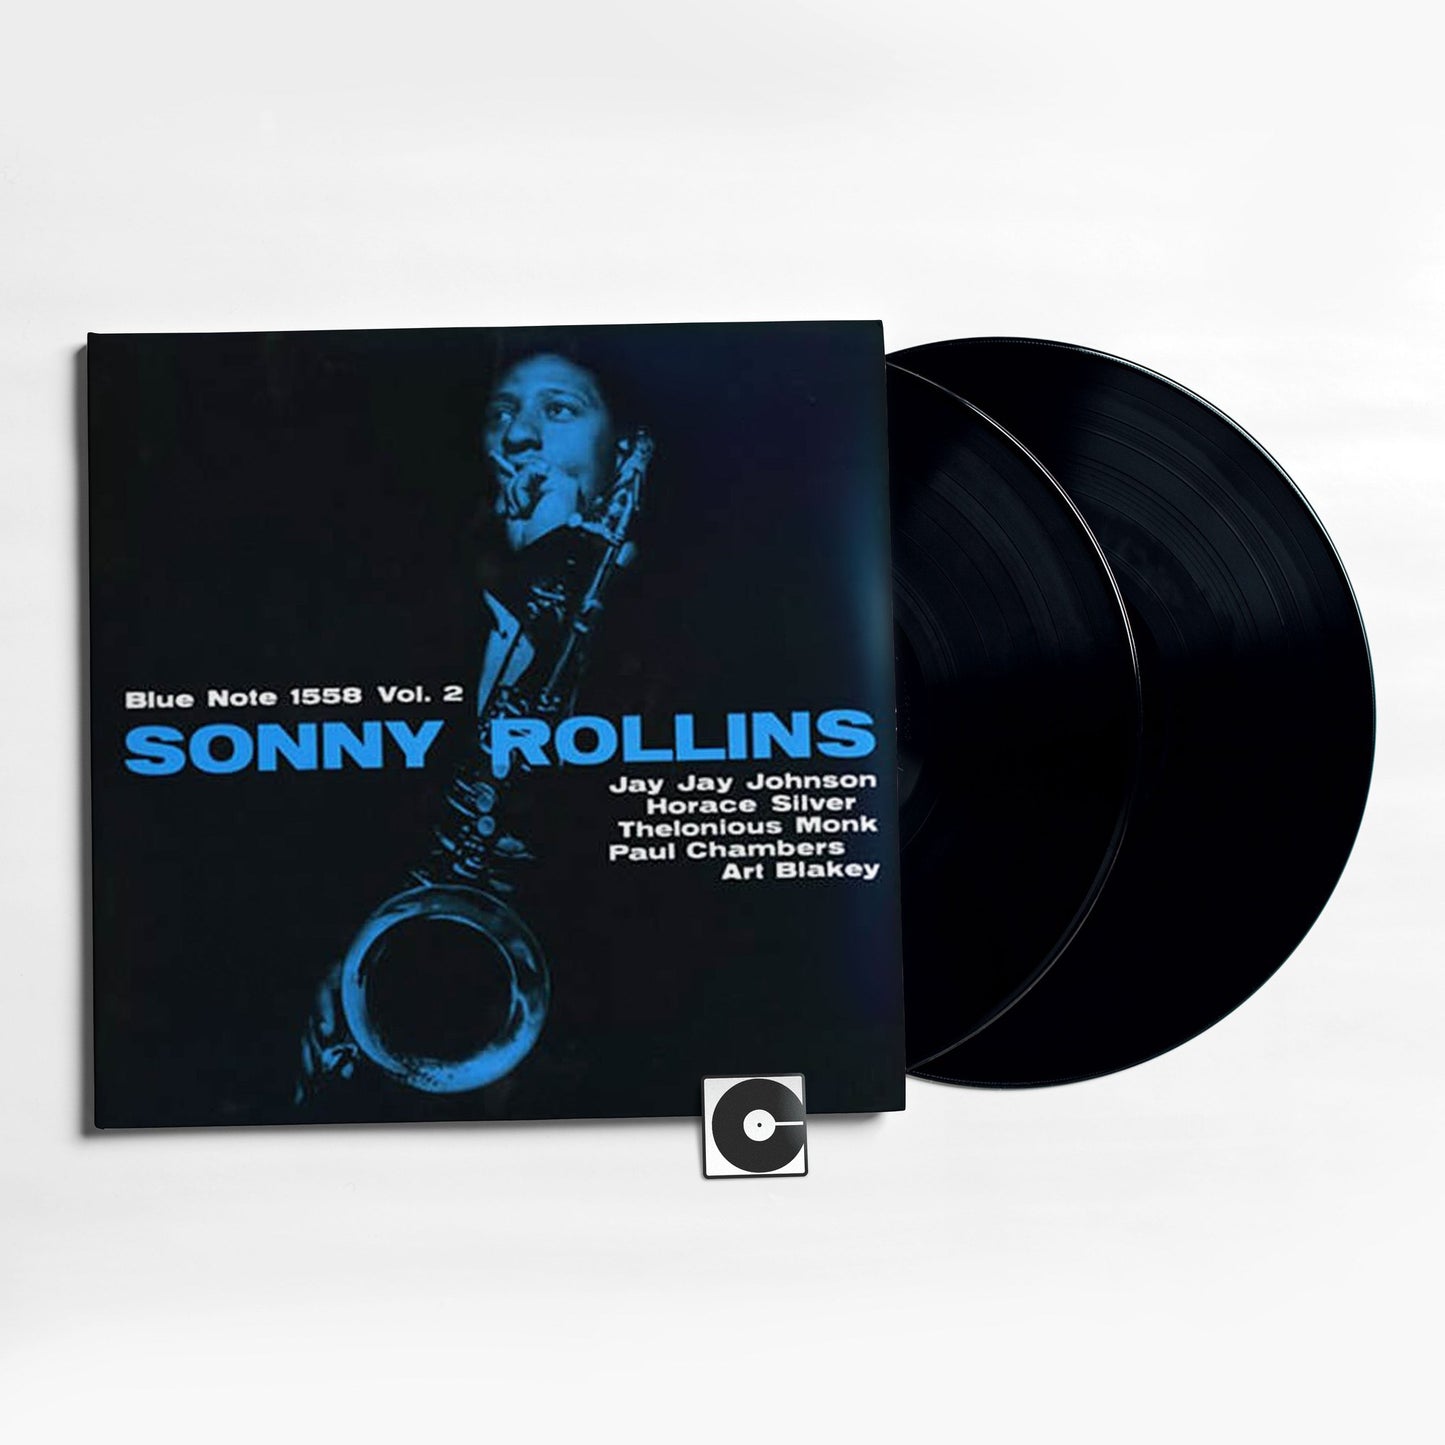 Sonny Rollins - "Volume 2" Analogue Productions